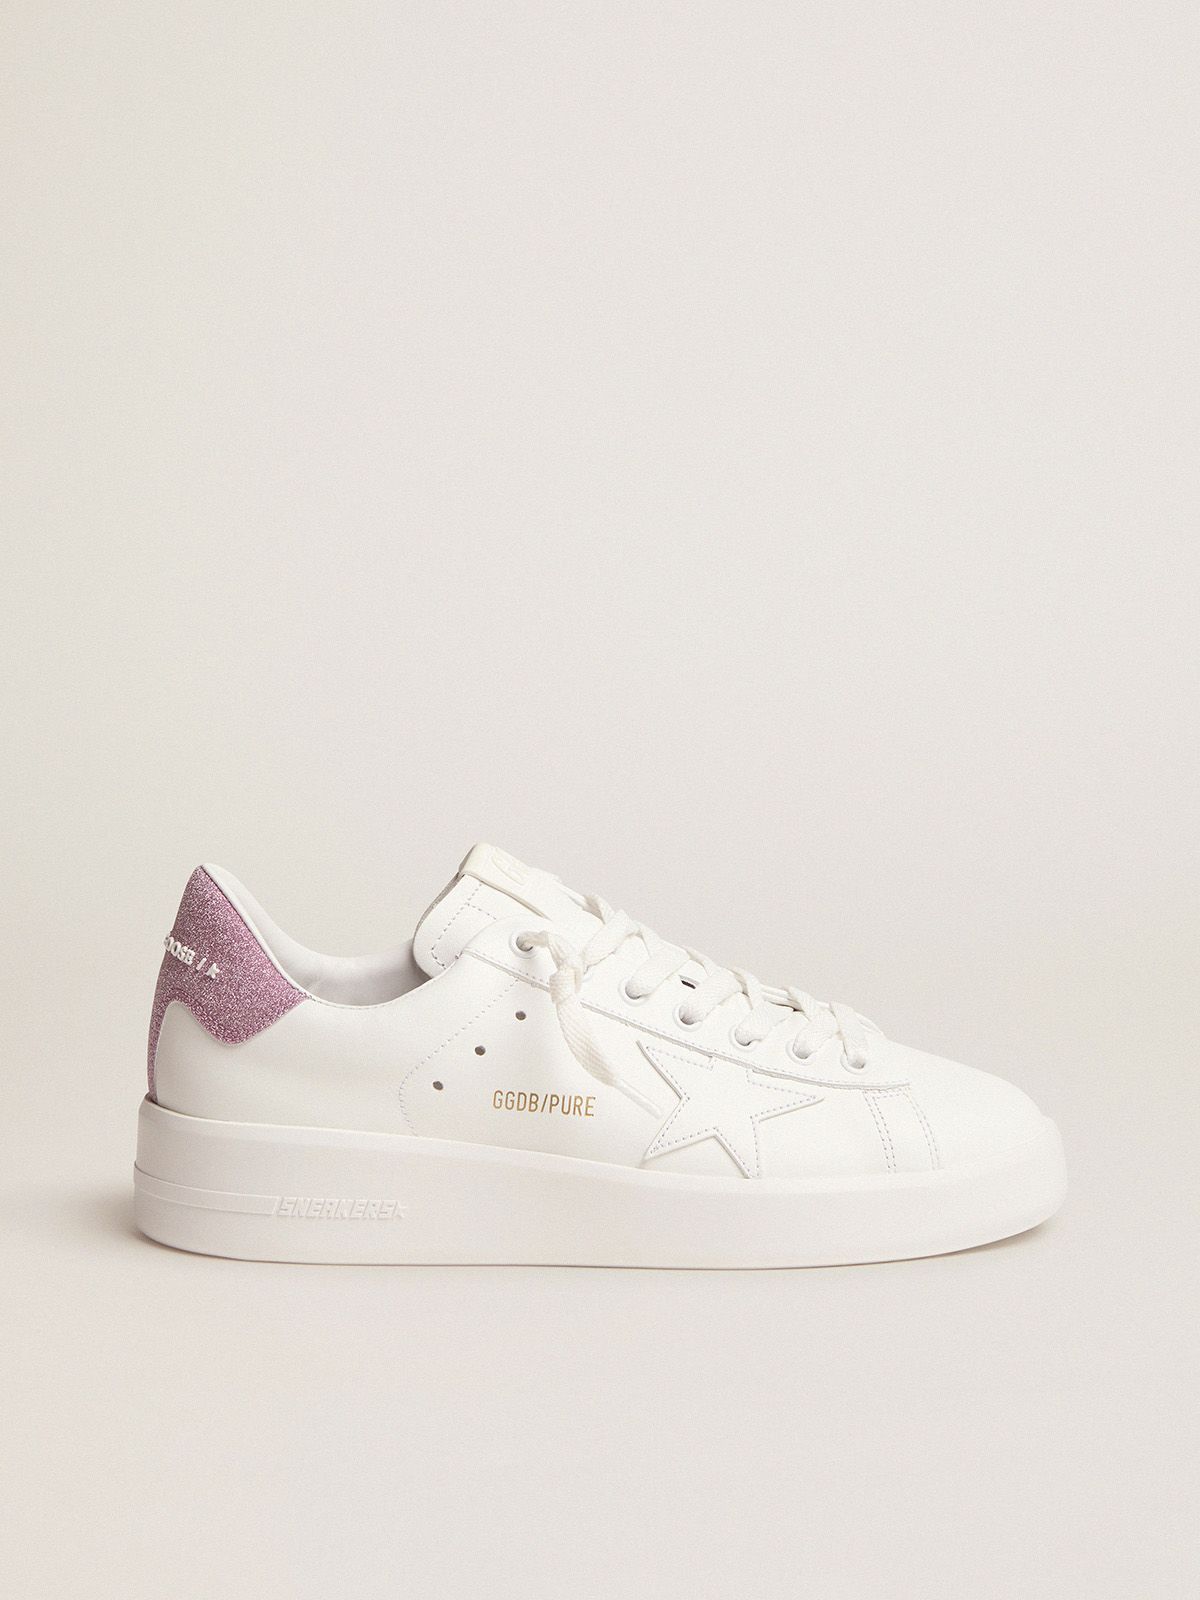 golden goose heel white pink with leather Purestar glitter tab in sneakers